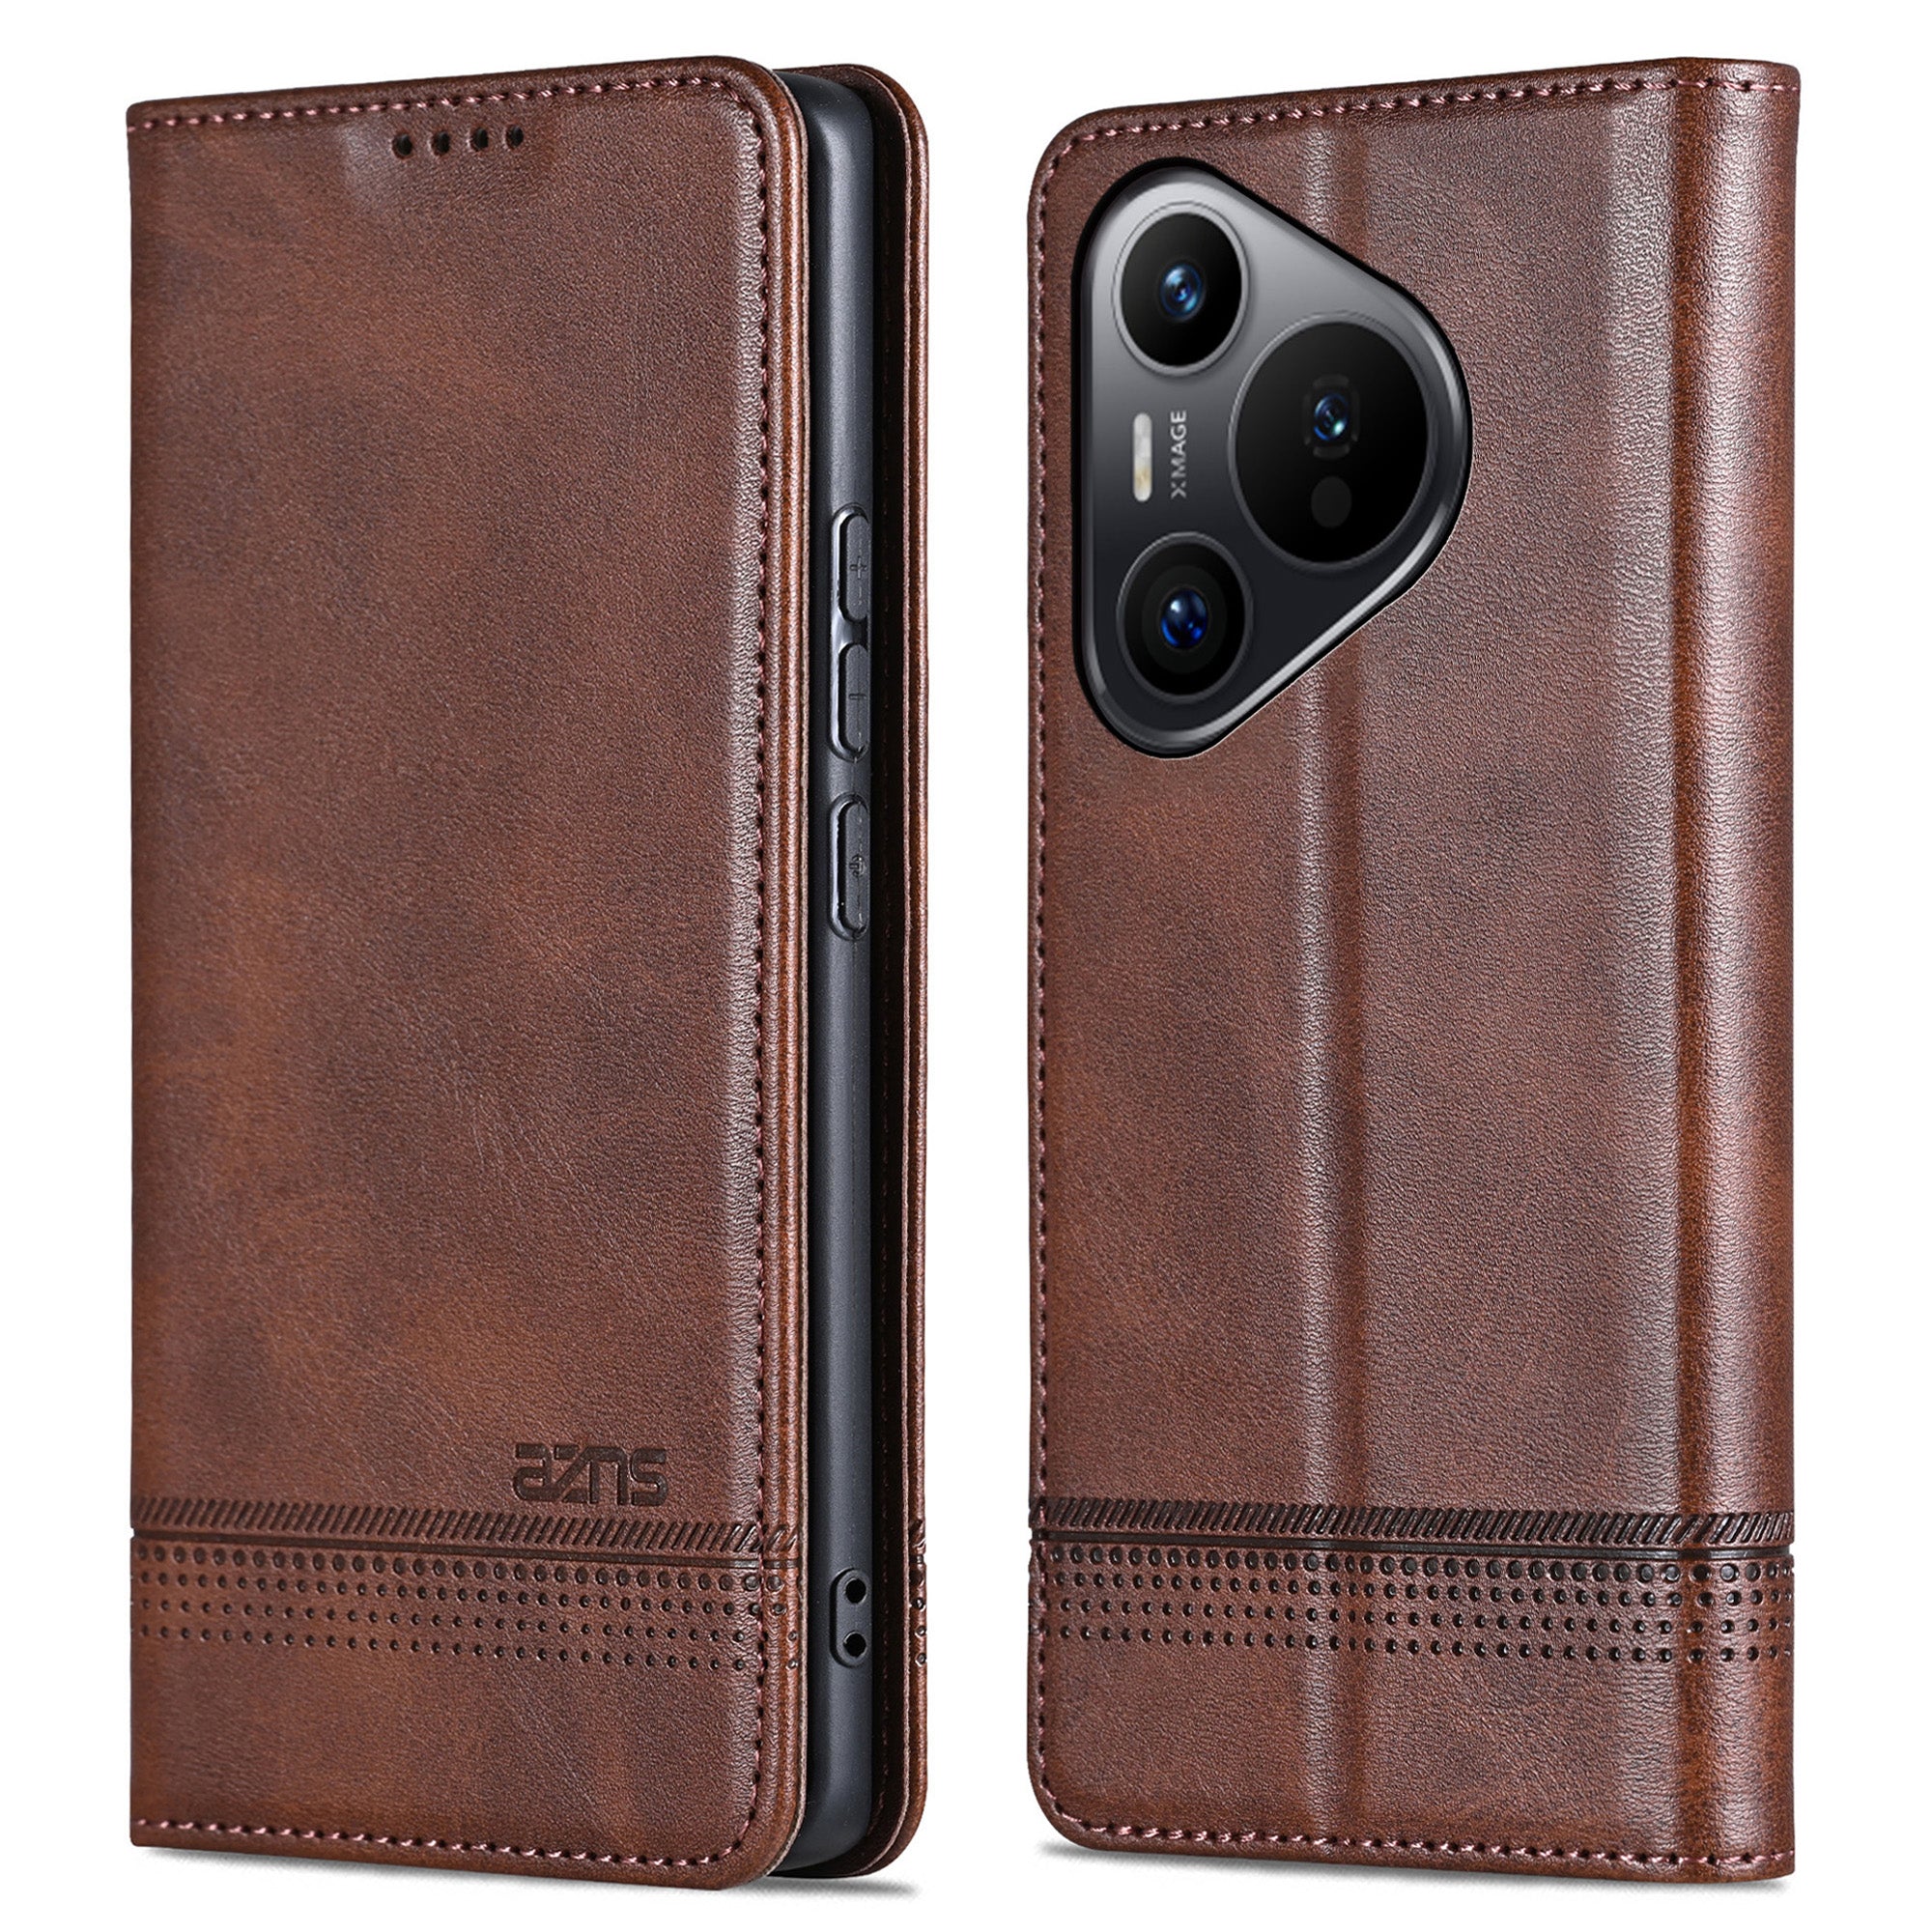 AZNS For Huawei Pura 70 Pro / Pura 70 Pro+ Case PU Leather Folio Wallet Magnetic Auto-absorbed Phone Cover - Coffee